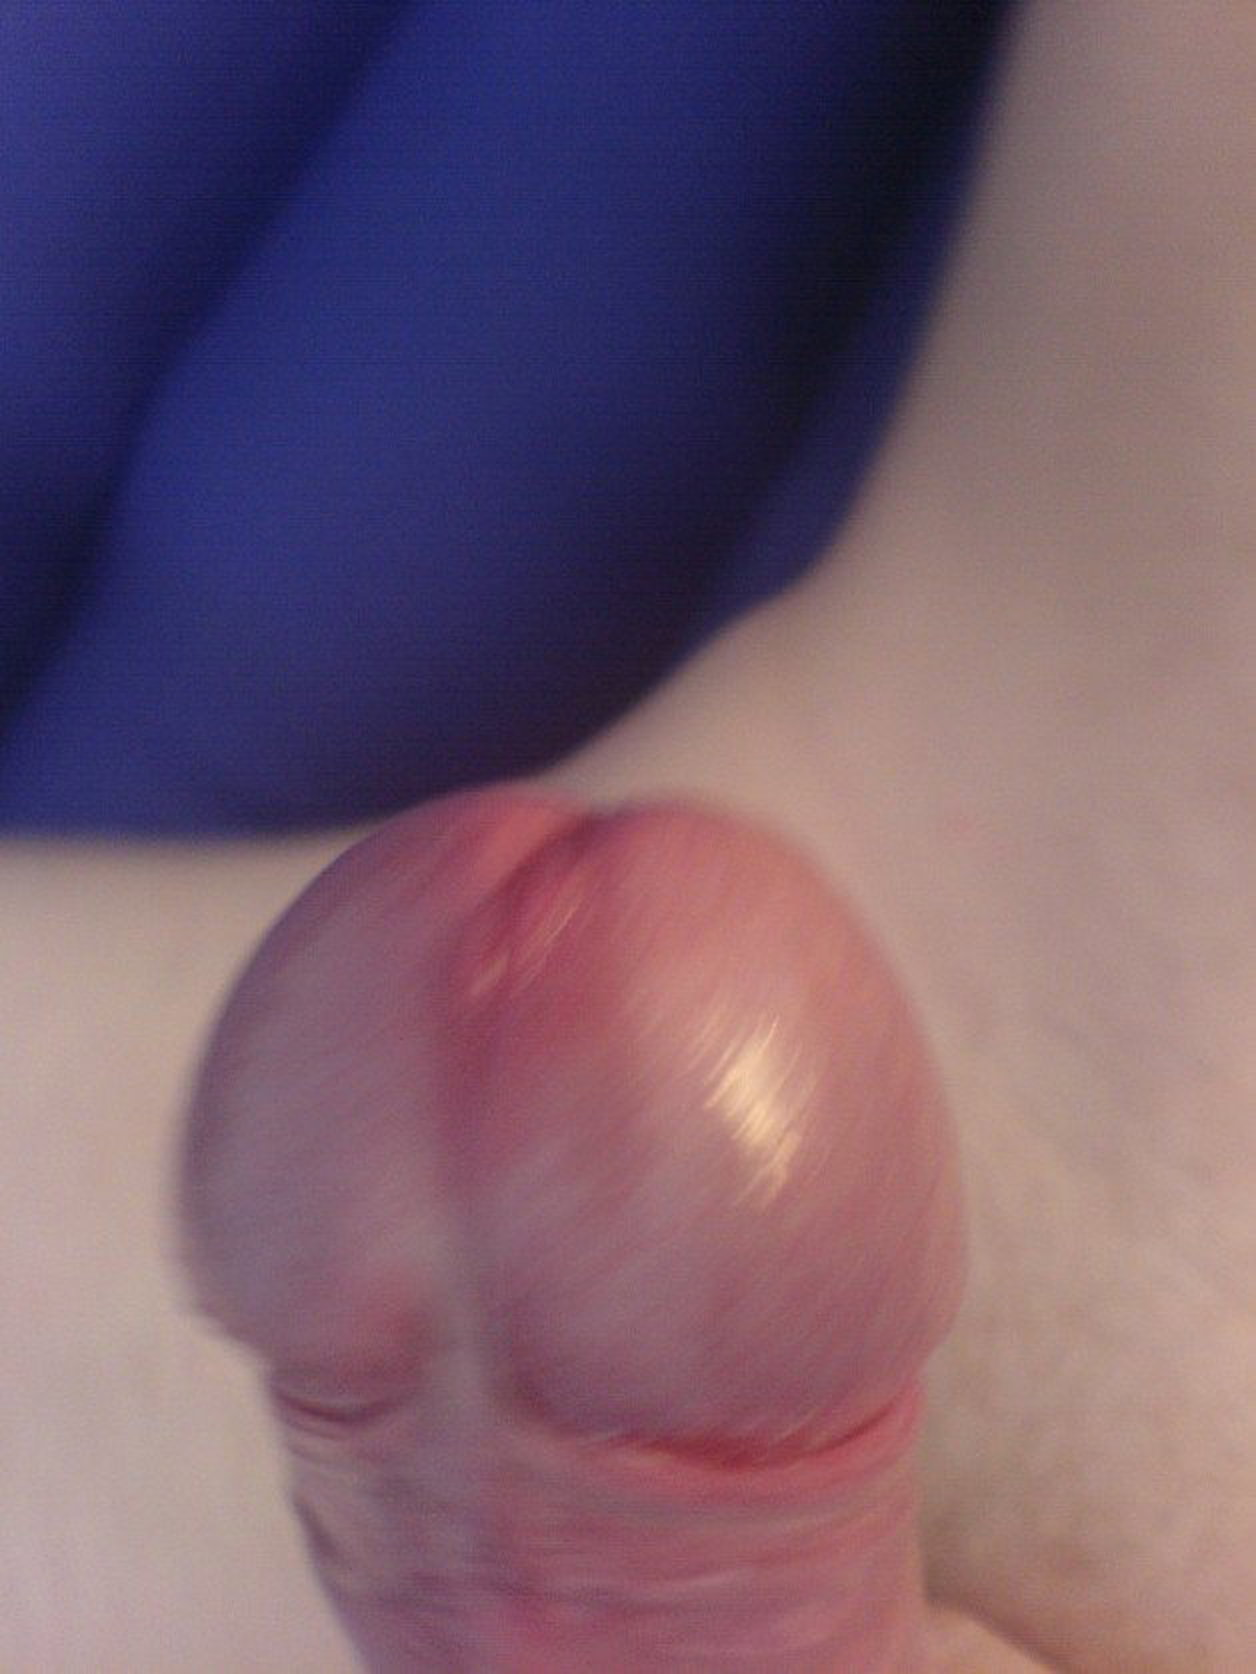 Photo by MrBang with the username @Bangable,  March 20, 2021 at 3:50 PM. The post is about the topic Foreskin is Sexy and the text says 'This was taken inside my tent at during the Le Mans 2006...

#Bangable #MrBang #Foreskin #Intact #Uncut #Veins #BigCock'